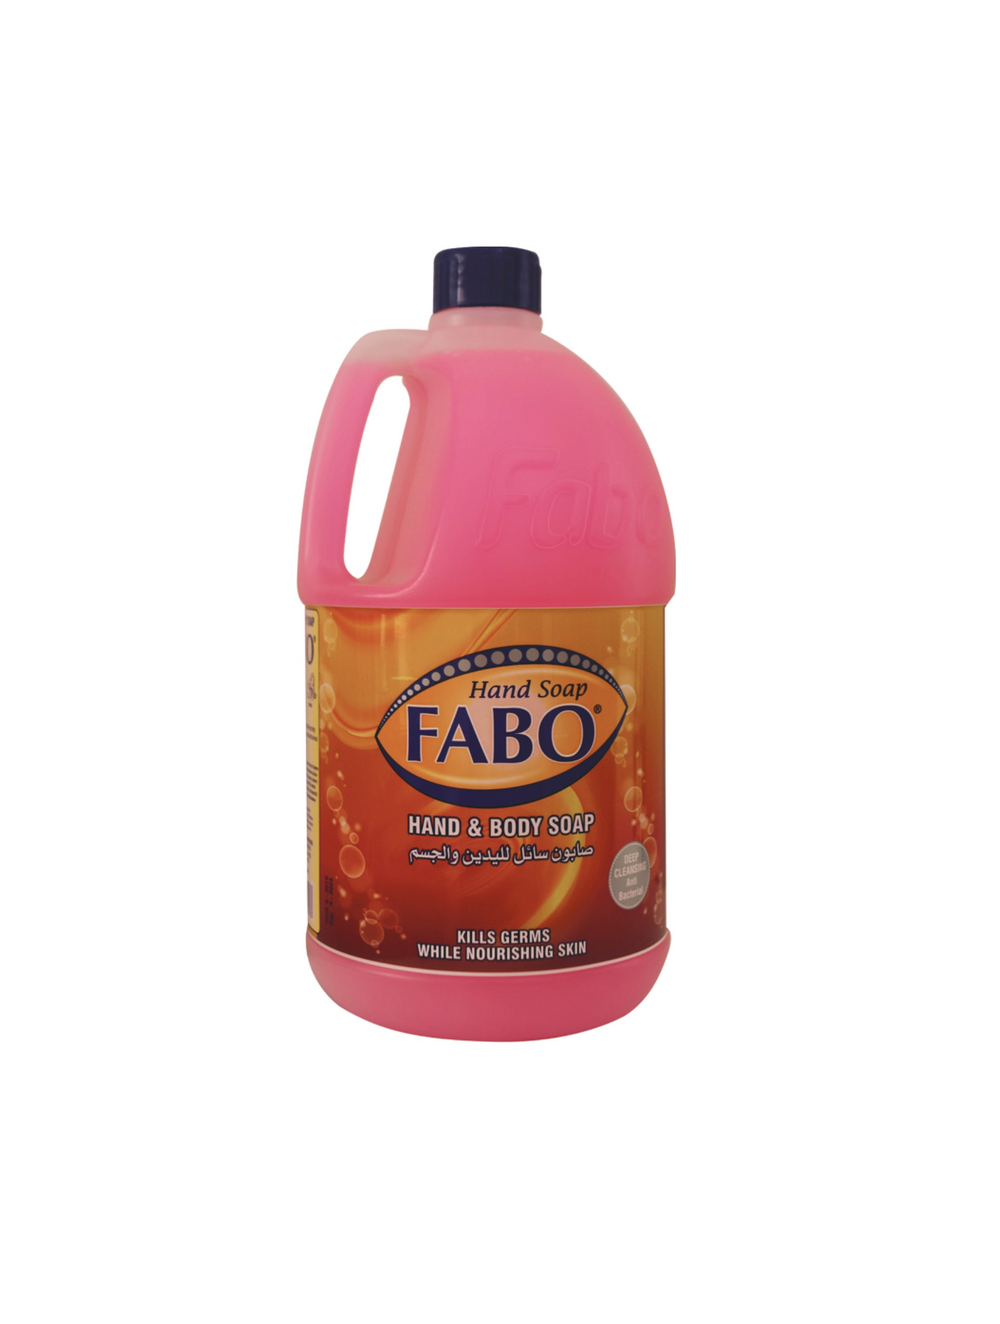 fabo-products_page-0054